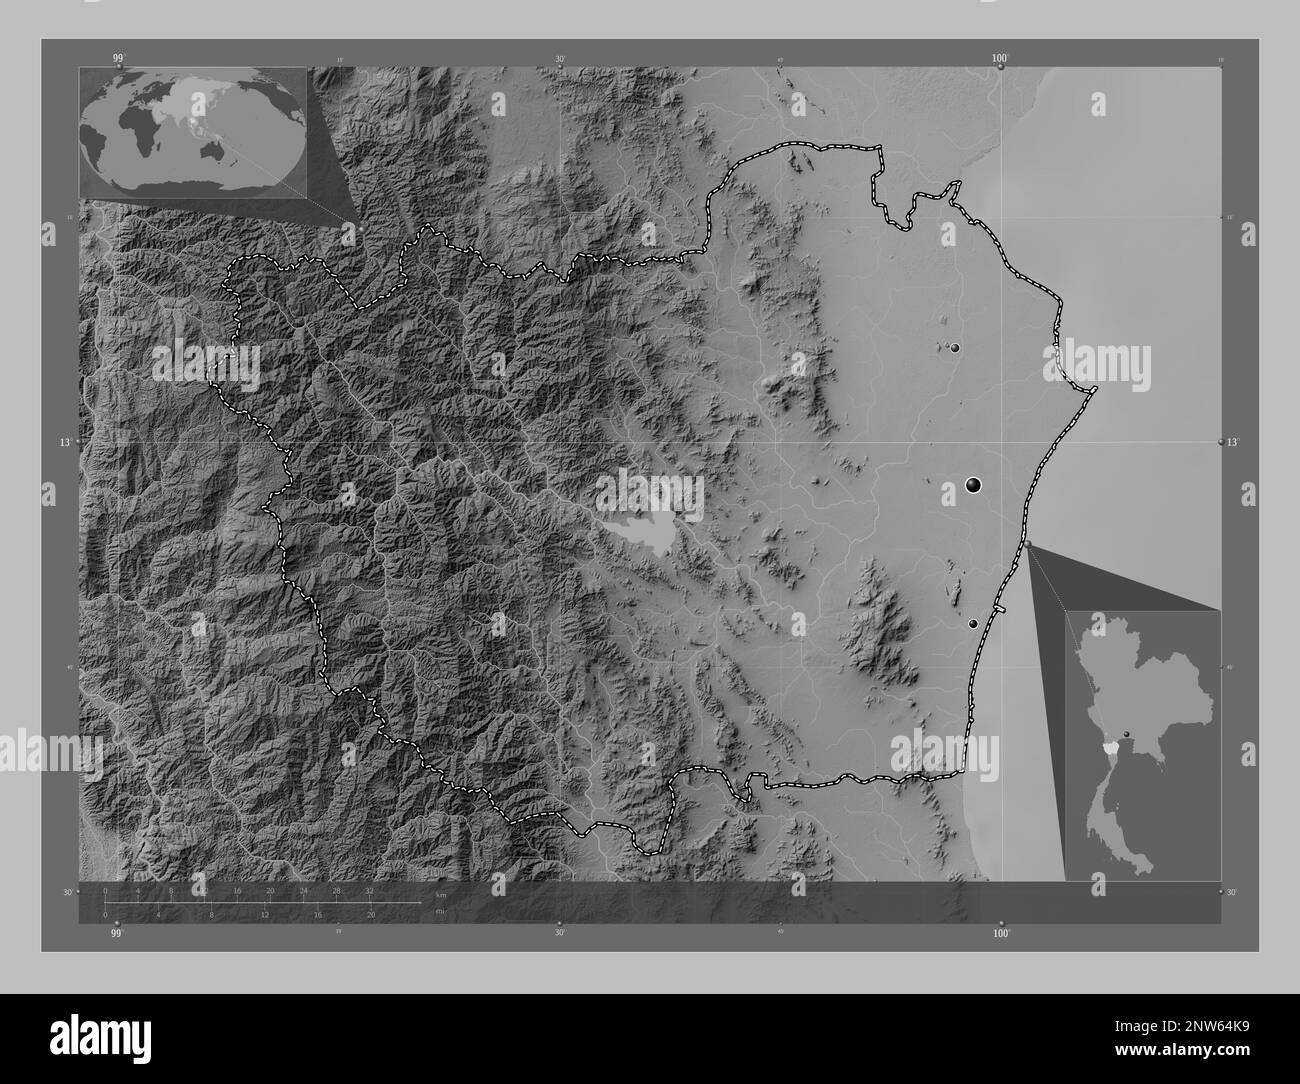 Phetchaburi, province of Thailand. Grayscale elevation map with lakes and rivers. Locations of major cities of the region. Corner auxiliary location m Stock Photo